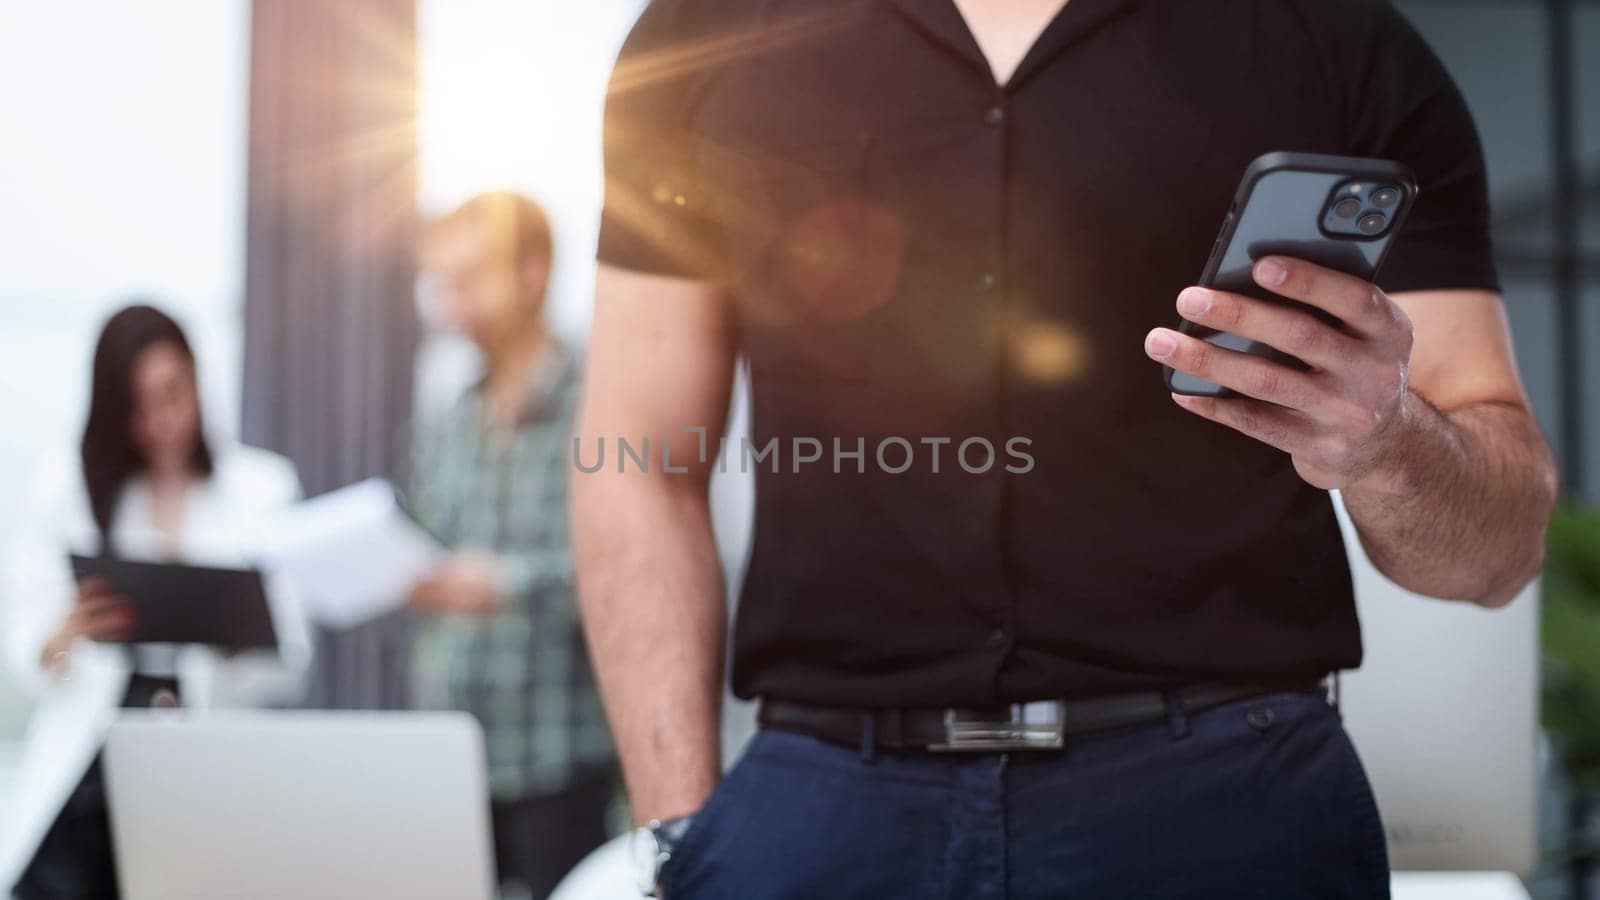 Modern gadget. Close-up of a smartphone screen in the hands of a businessman.